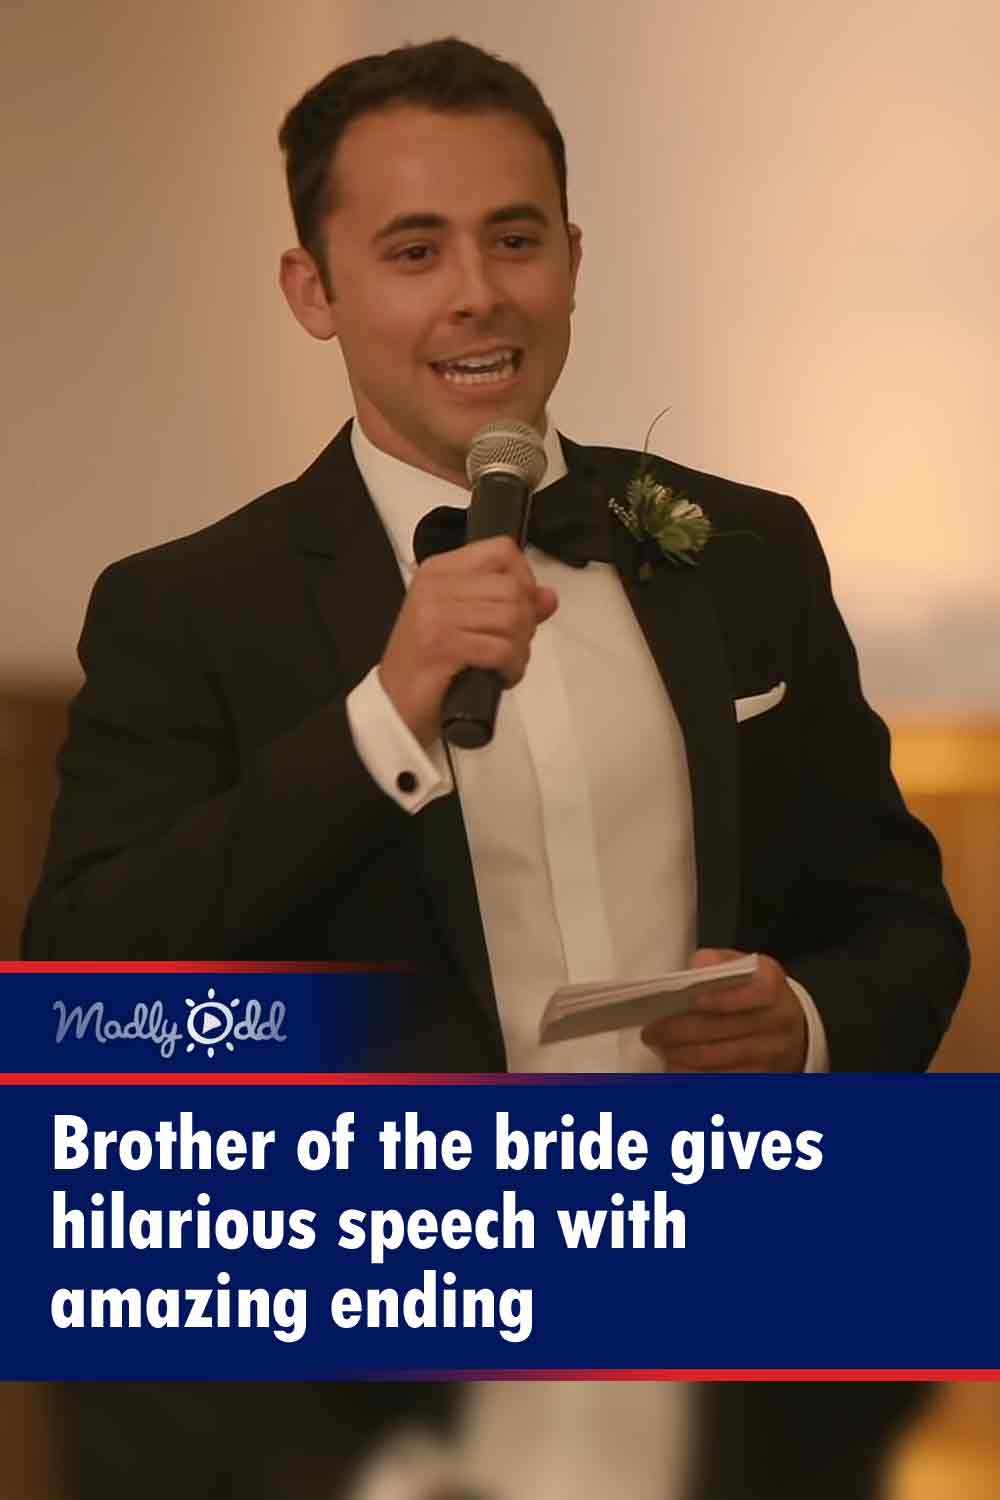 Brother of the bride gives hilarious speech with amazing ending